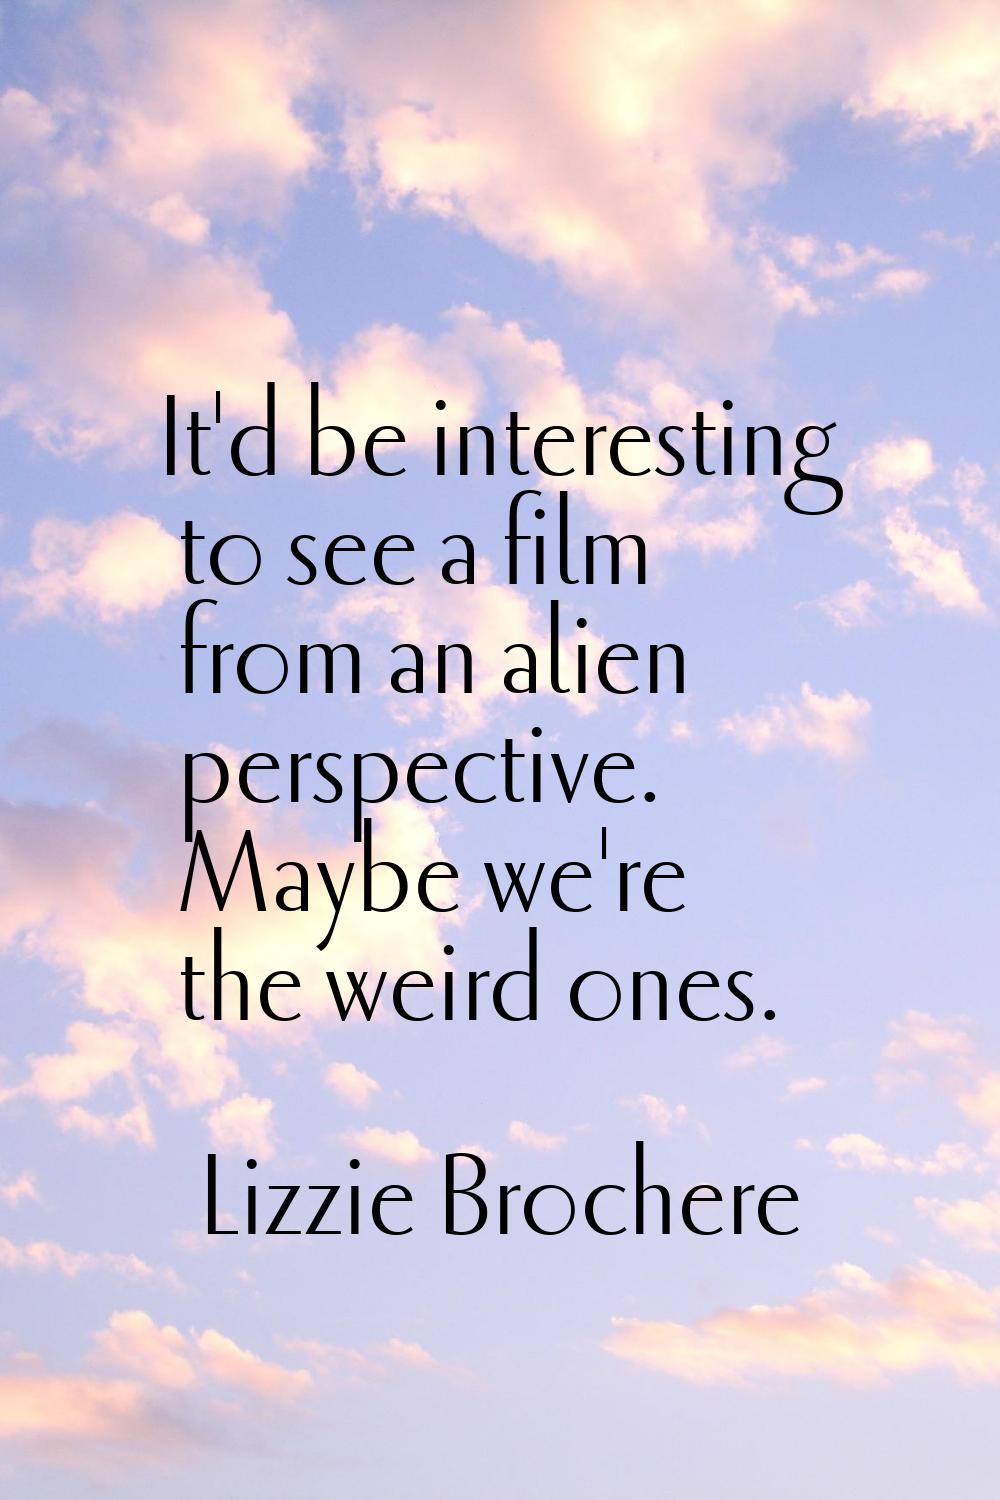 It'd be interesting to see a film from an alien perspective. Maybe we're the weird ones.